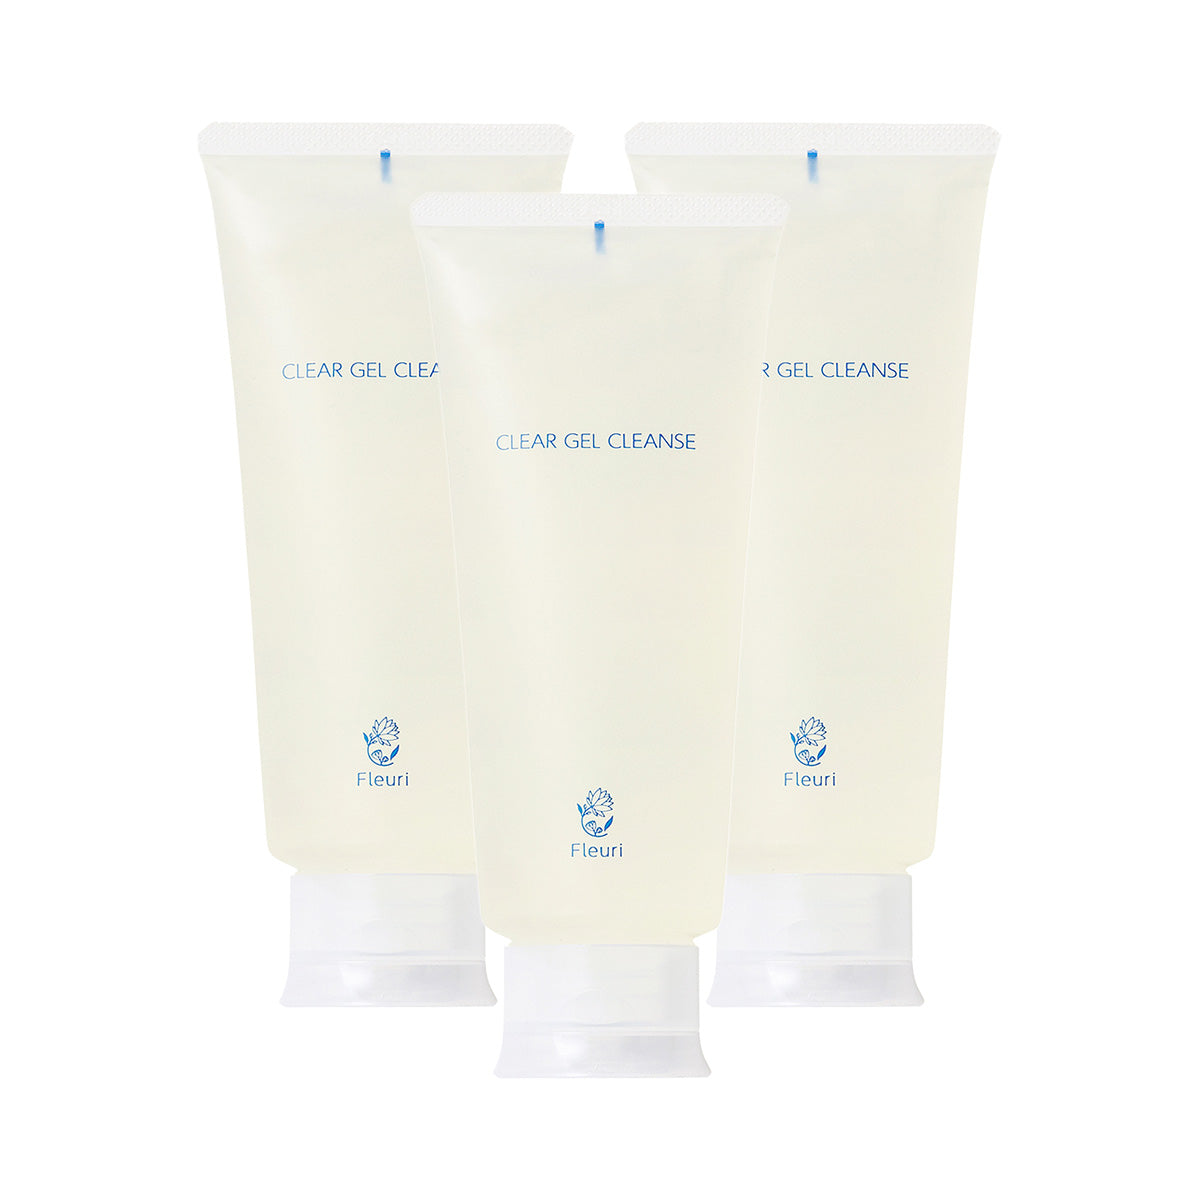 CLEAR GEL CLEANSE (3PCS) -Gentle Makeup Remover-